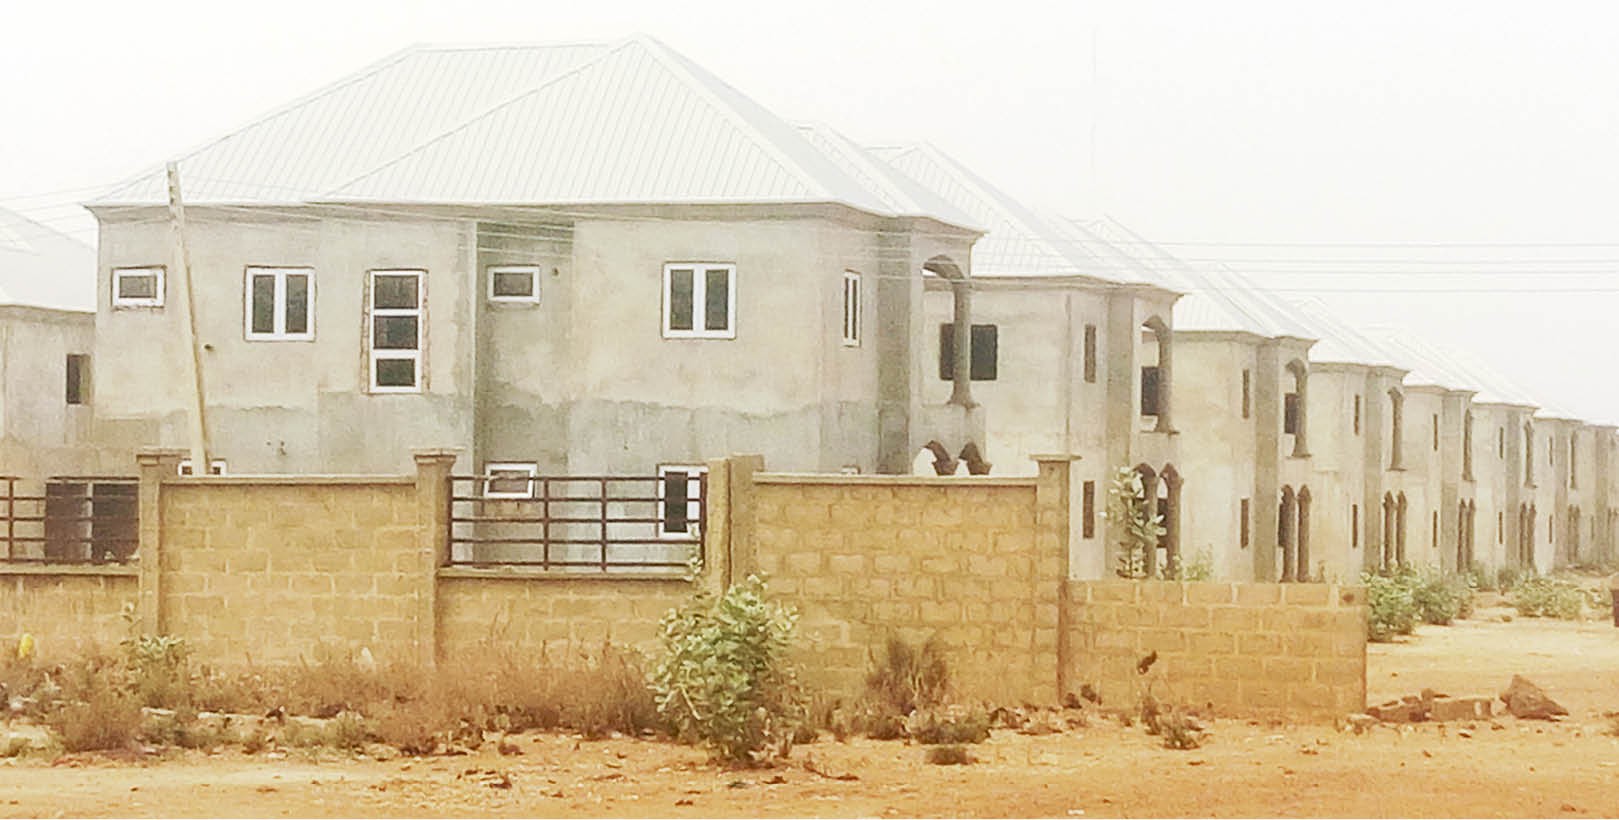 Gidan Salanke Housing Estate being constructed by the Sokoto State govt